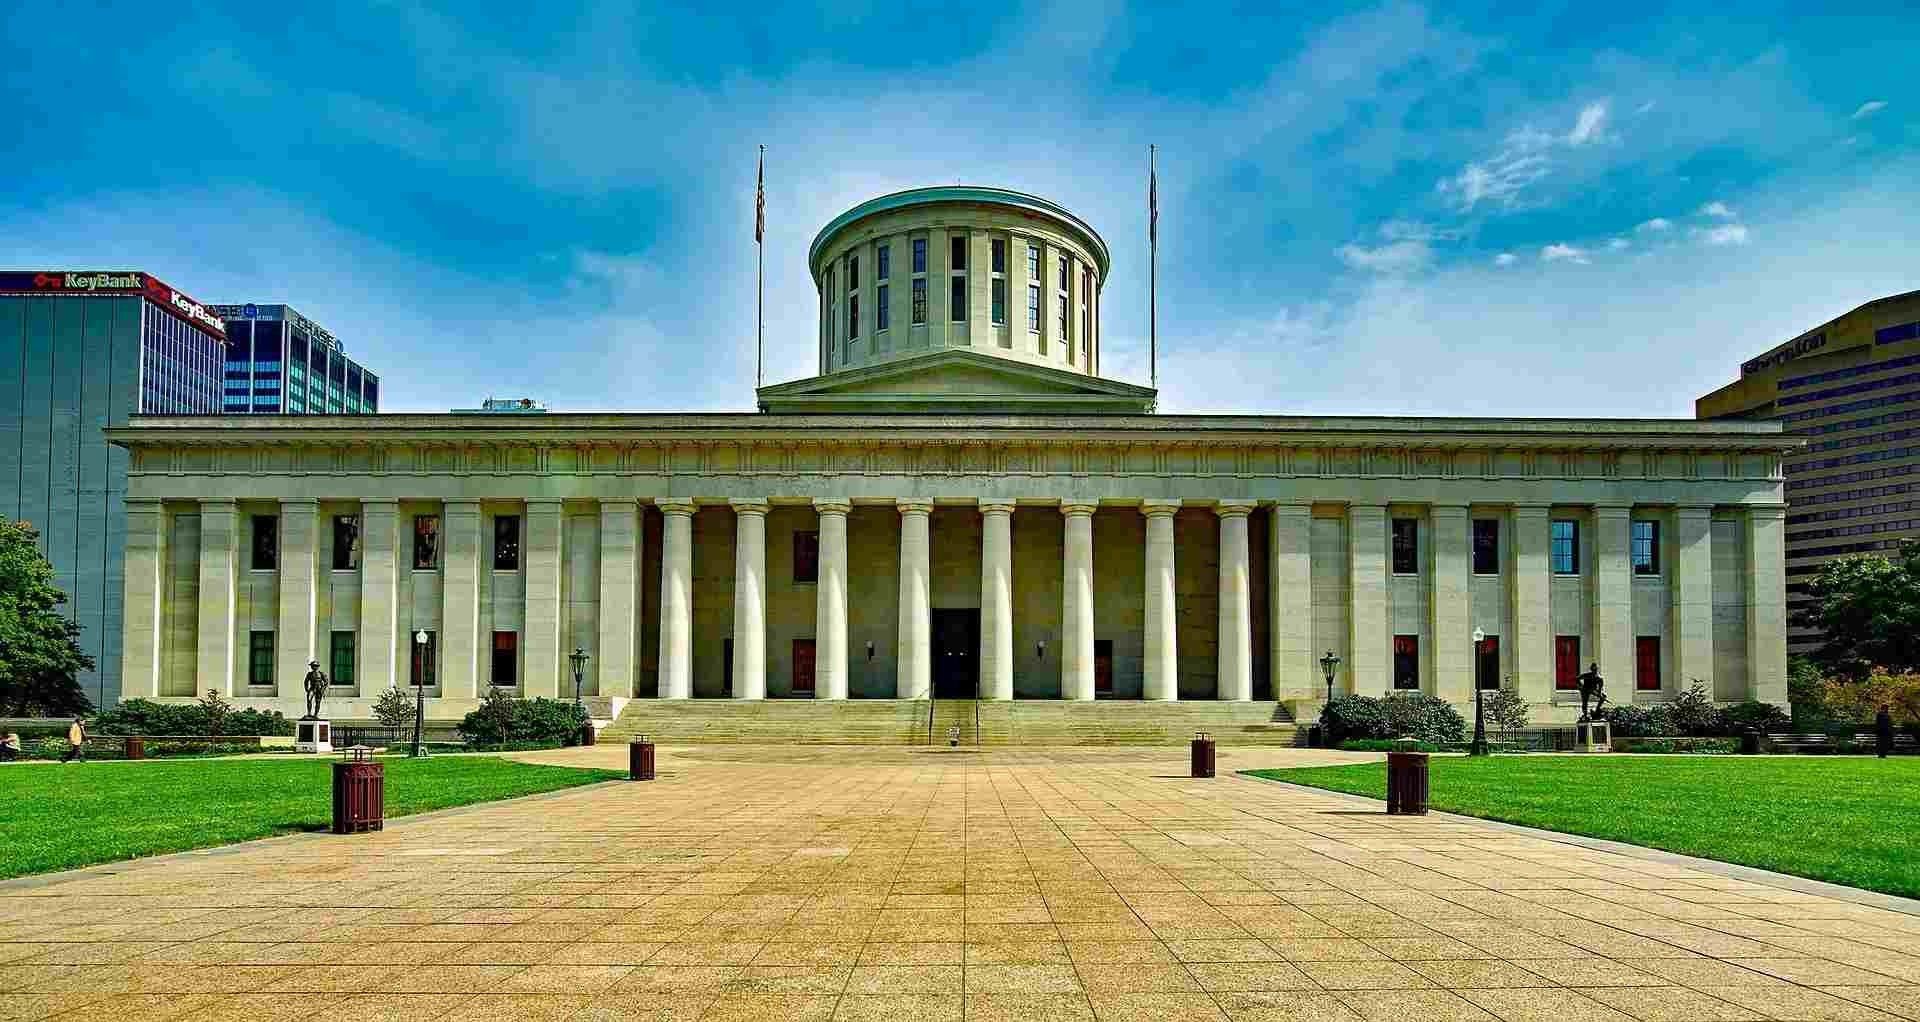 Ohio is a constituent state in the United States